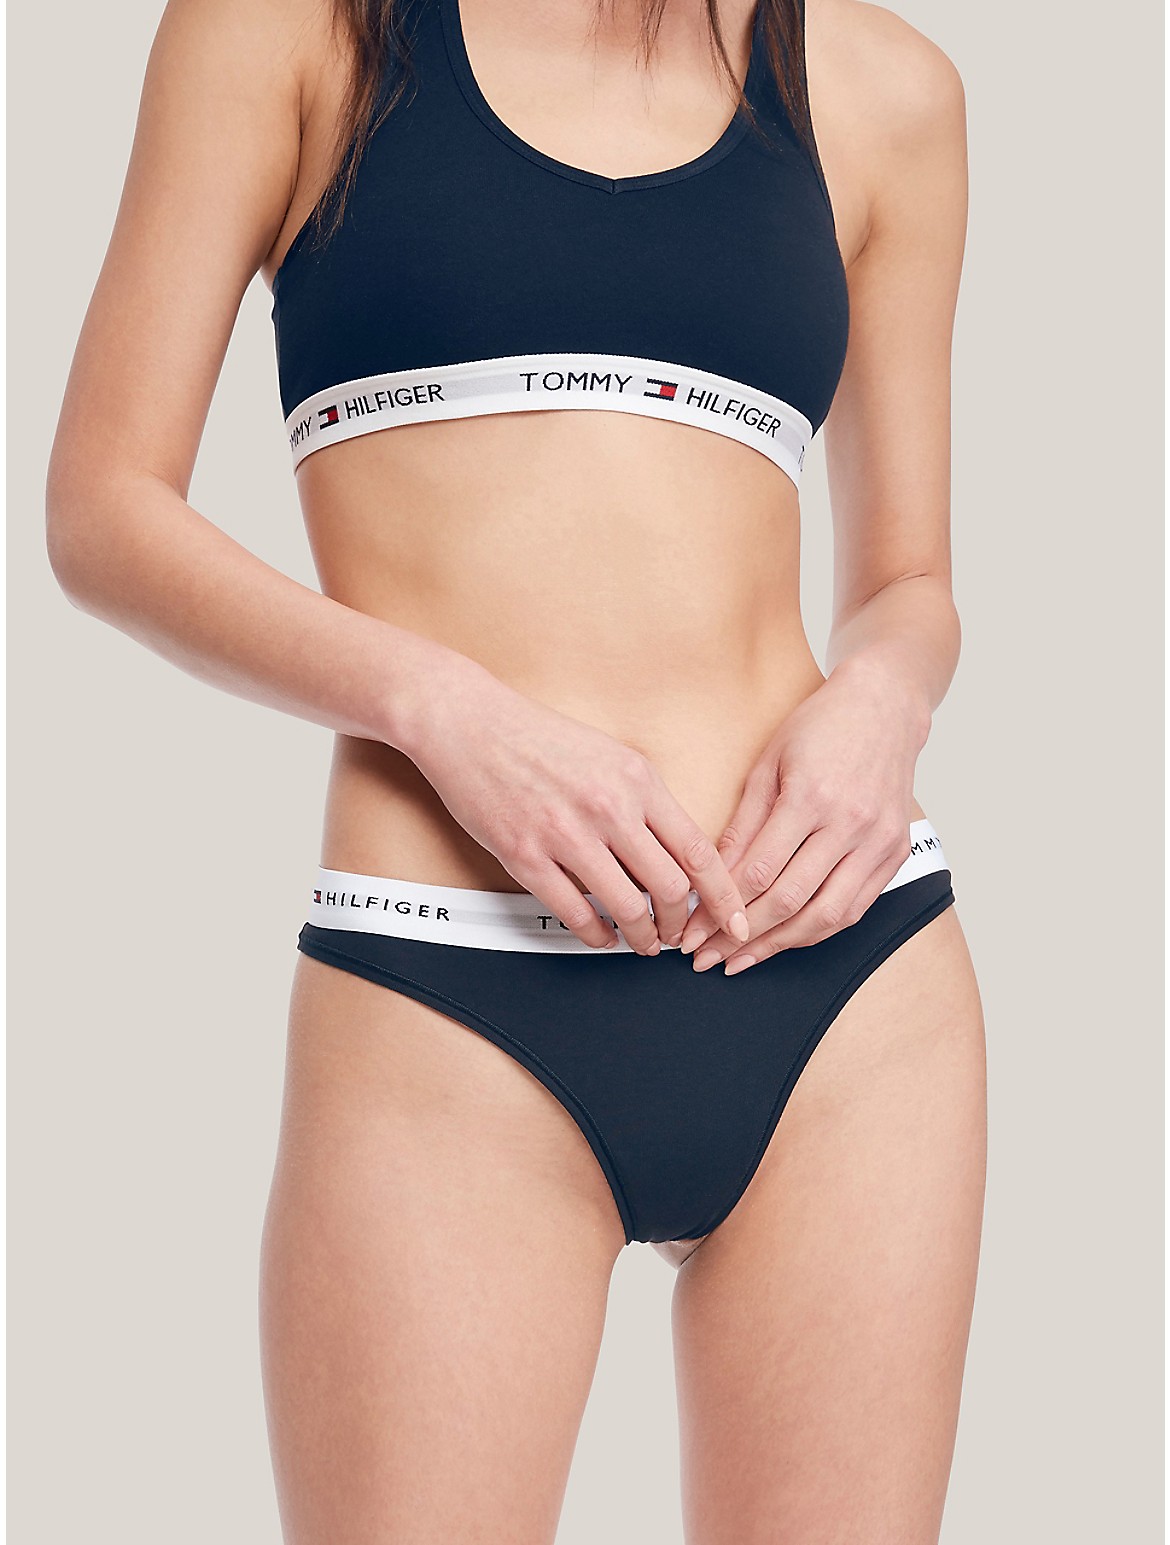 Tommy Hilfiger Signature Thong In Navy